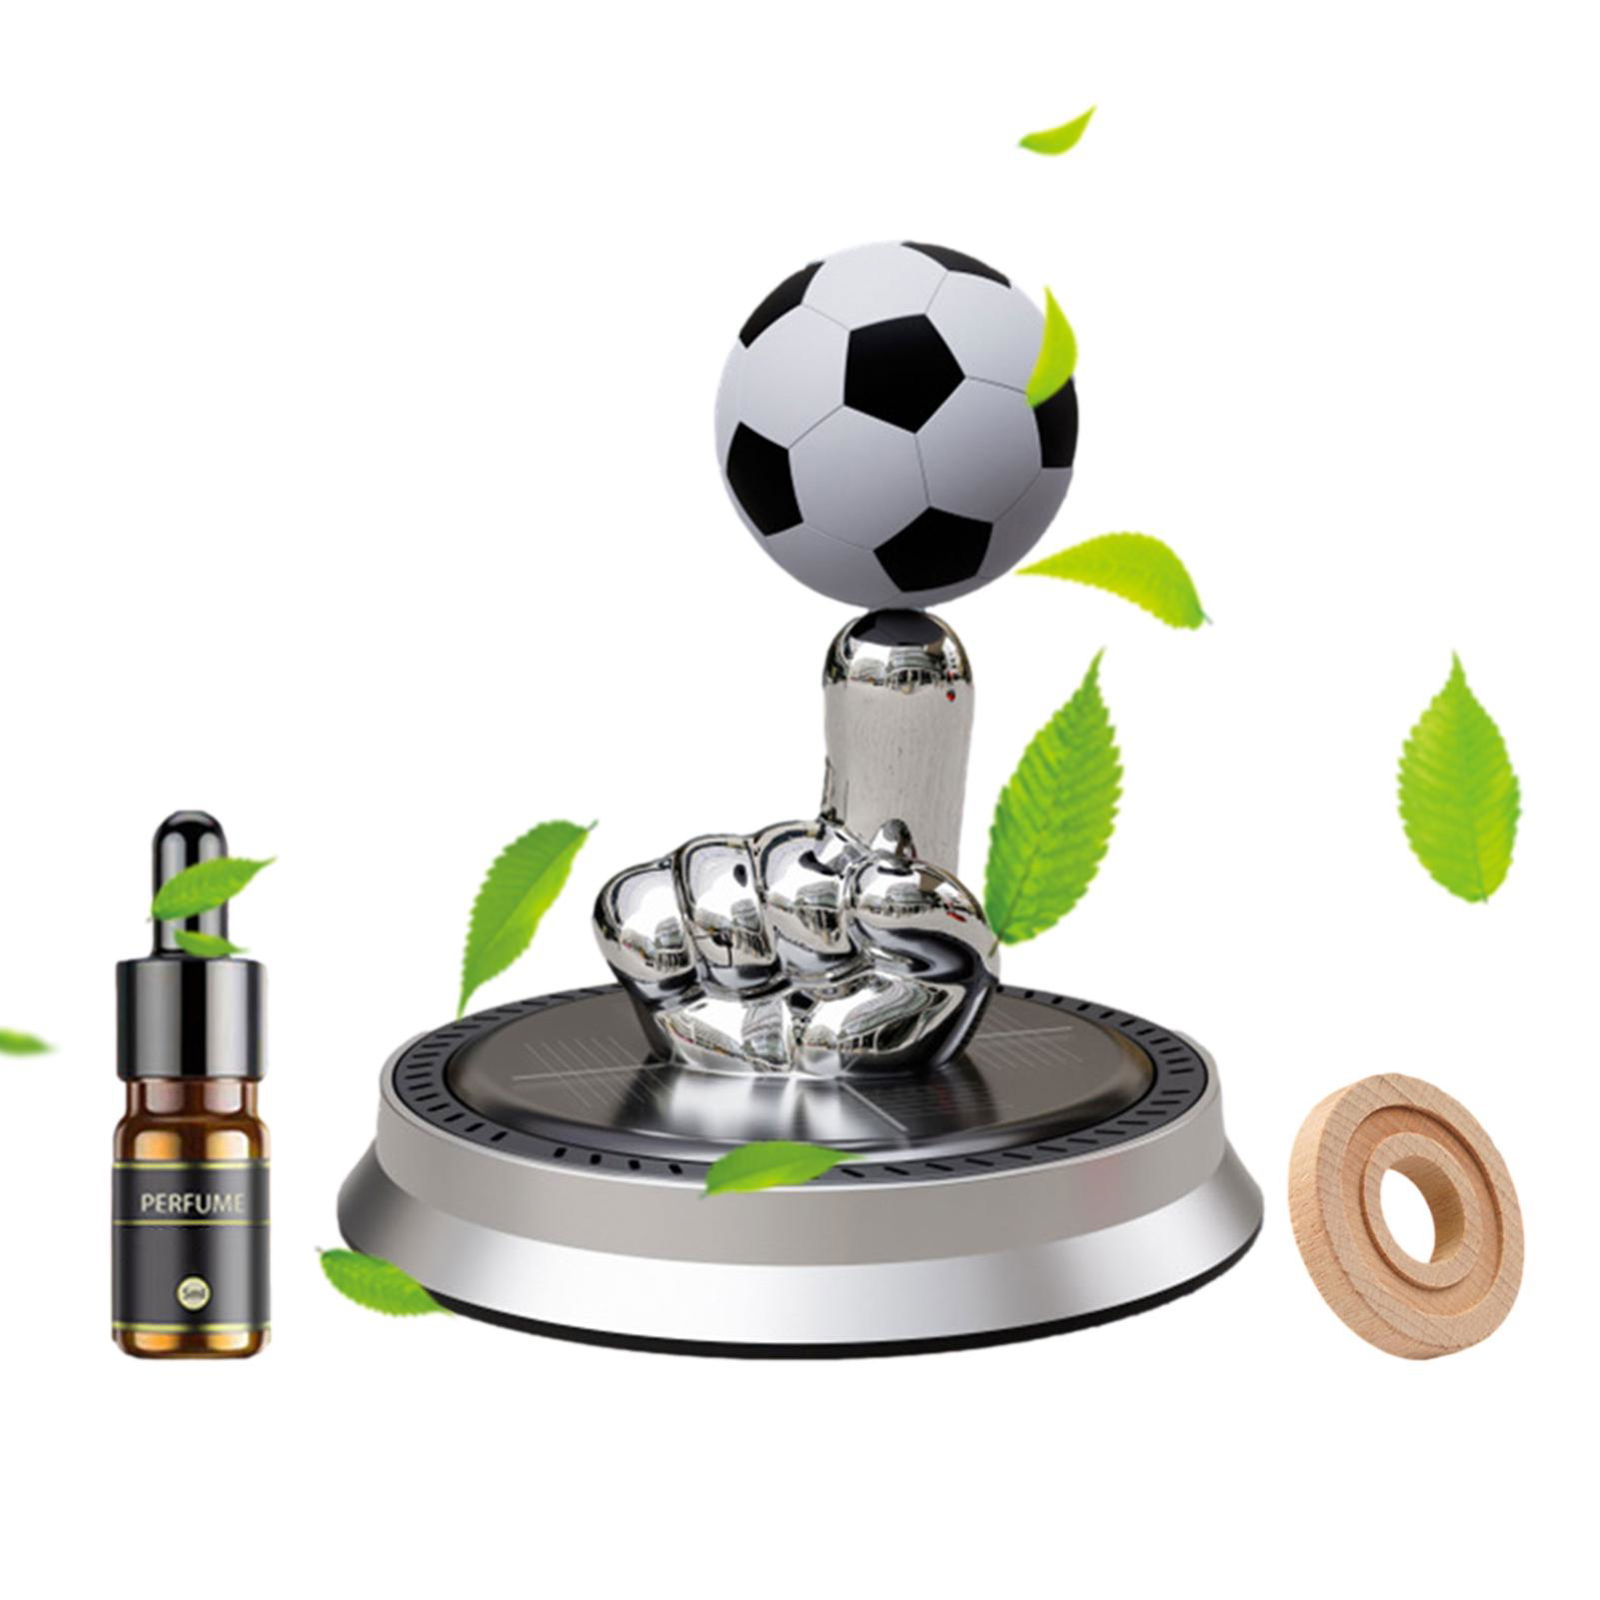 Solar Rotating Car Air Freshener | Finger Football Car Air Freshener | Solar Energy Rotating Car Perfume Long-Lasting Fragrance Aromatherapy, Car Decoration Accessories Image 